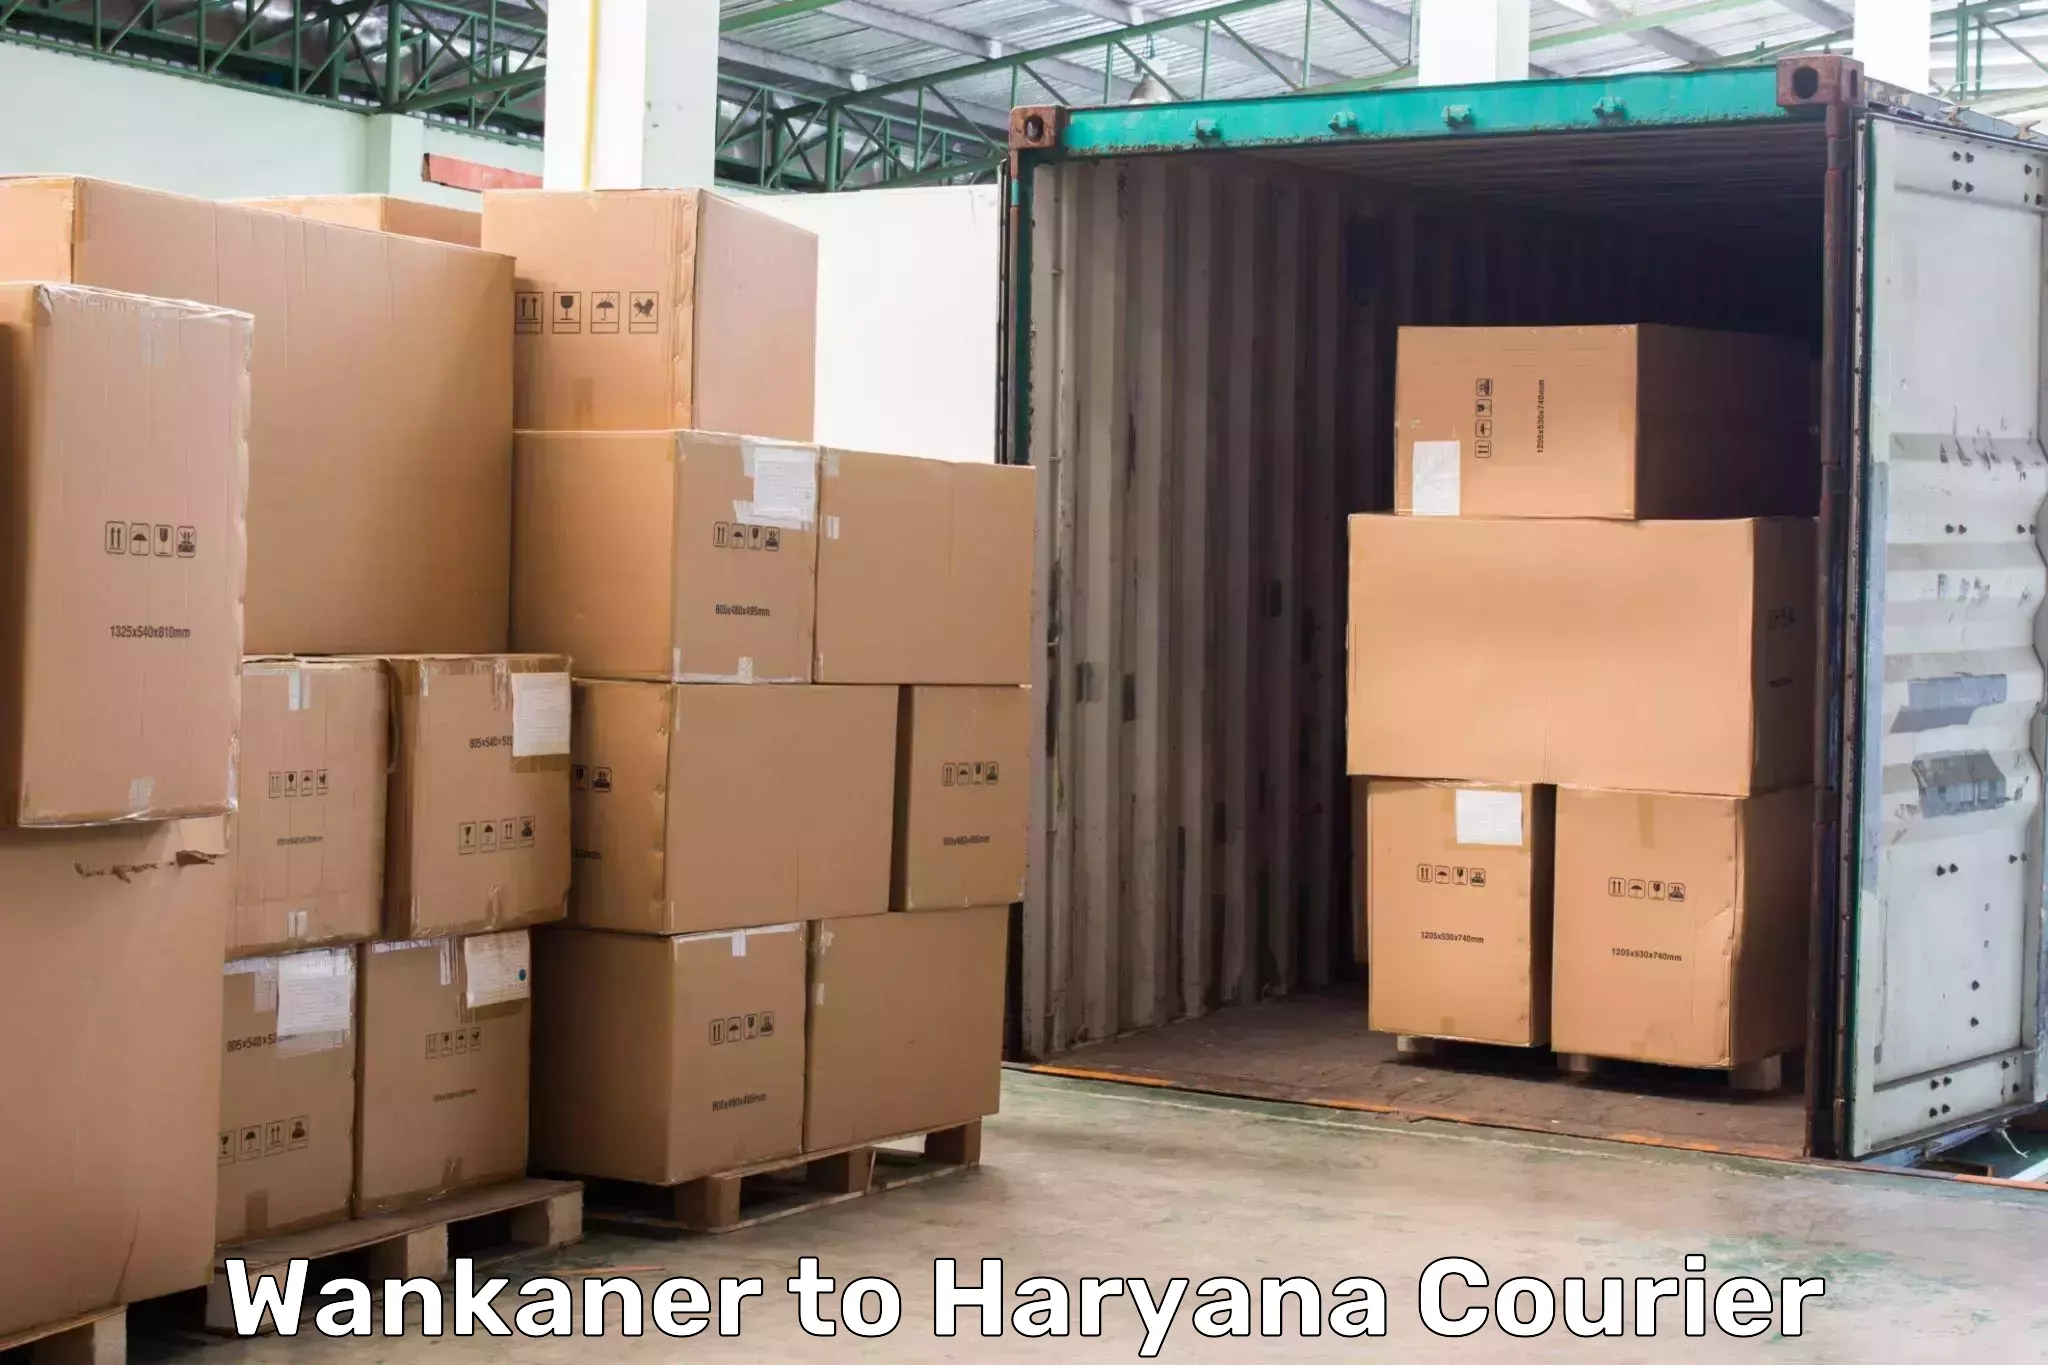 Package delivery network Wankaner to Panipat